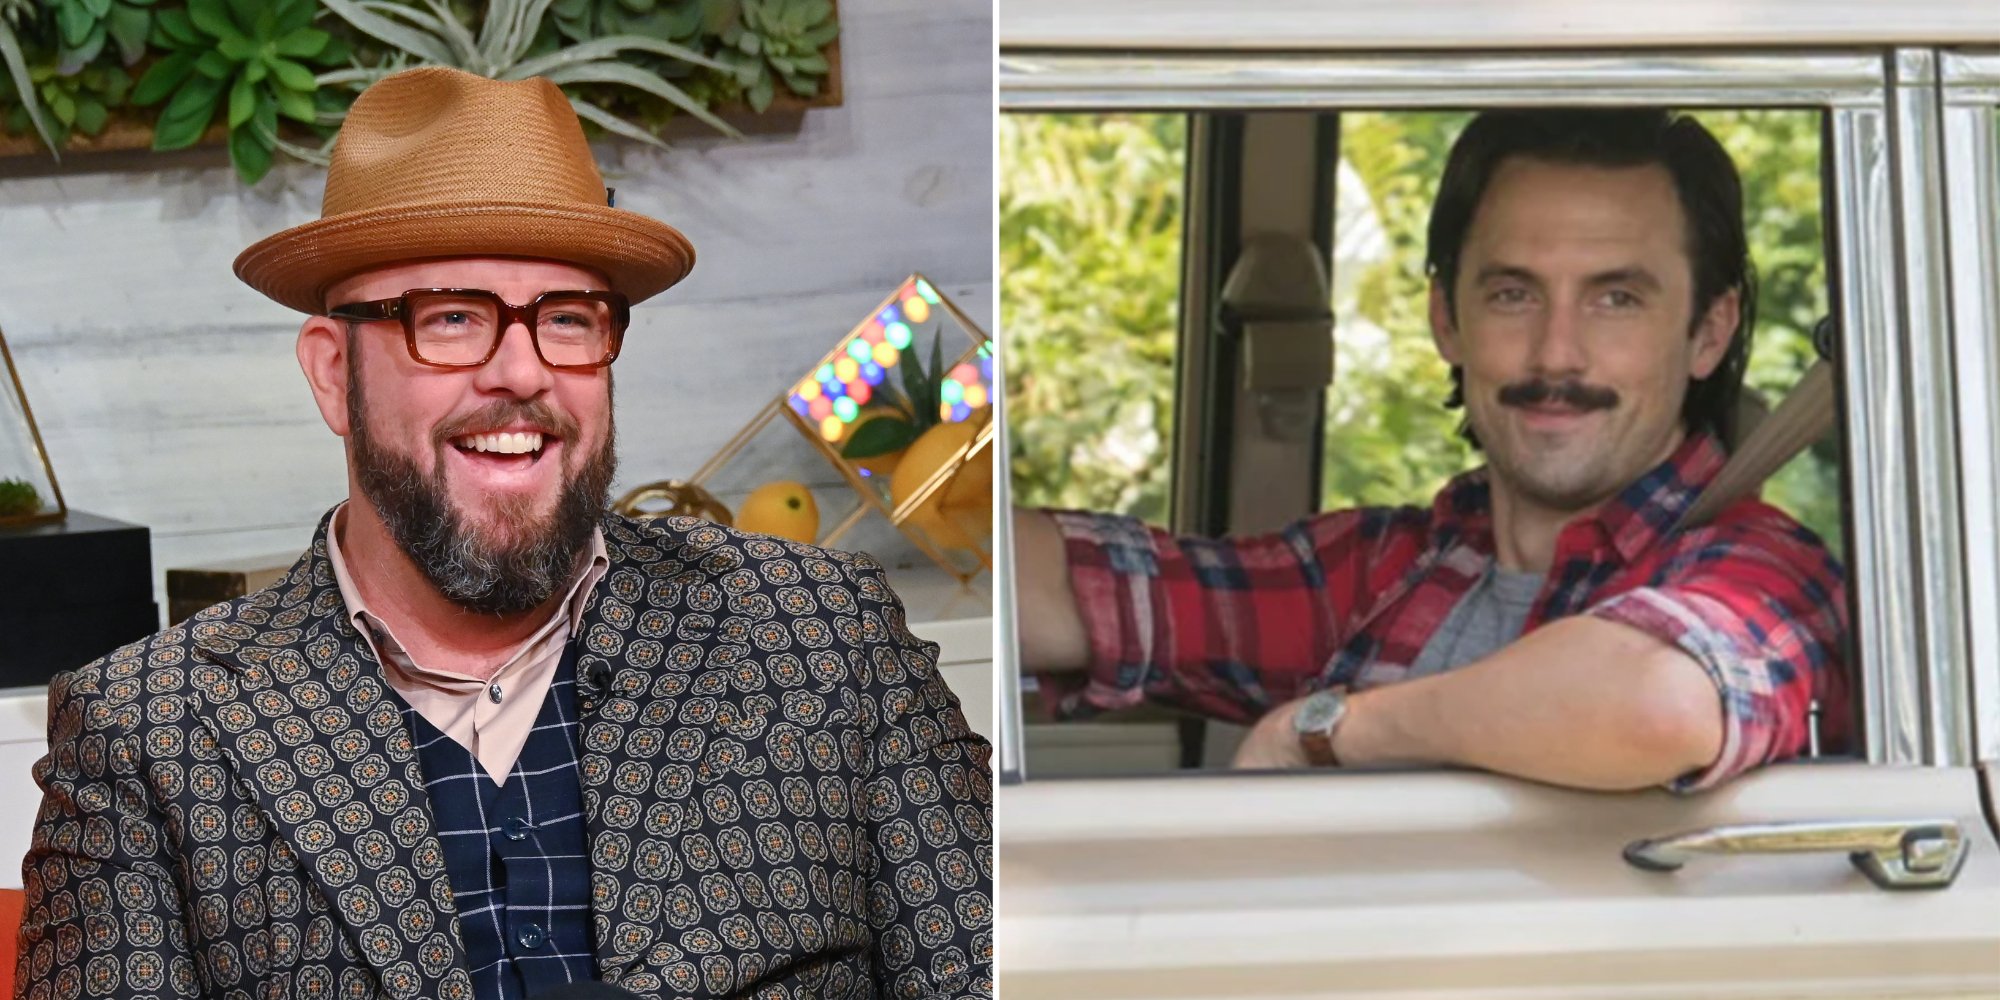 'This Is Us' star Chris Sullivan in a side by side photo with co-star Milo Ventimiglia driving a 1990 Jeep Wagoneer.